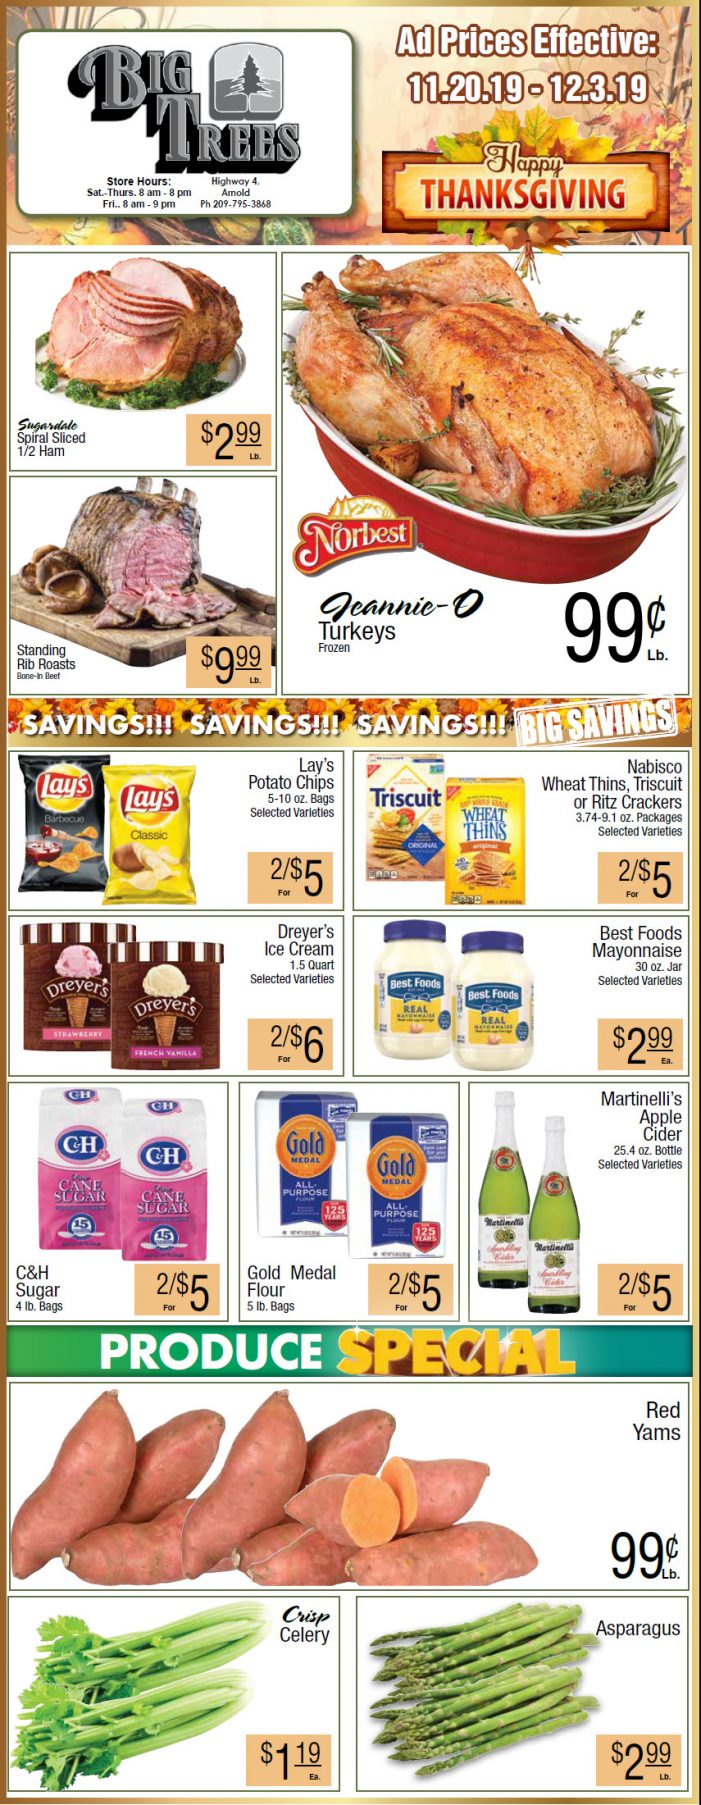 Big Trees Market Thanksgiving Ad & Grocery Specials Through December 3rd!